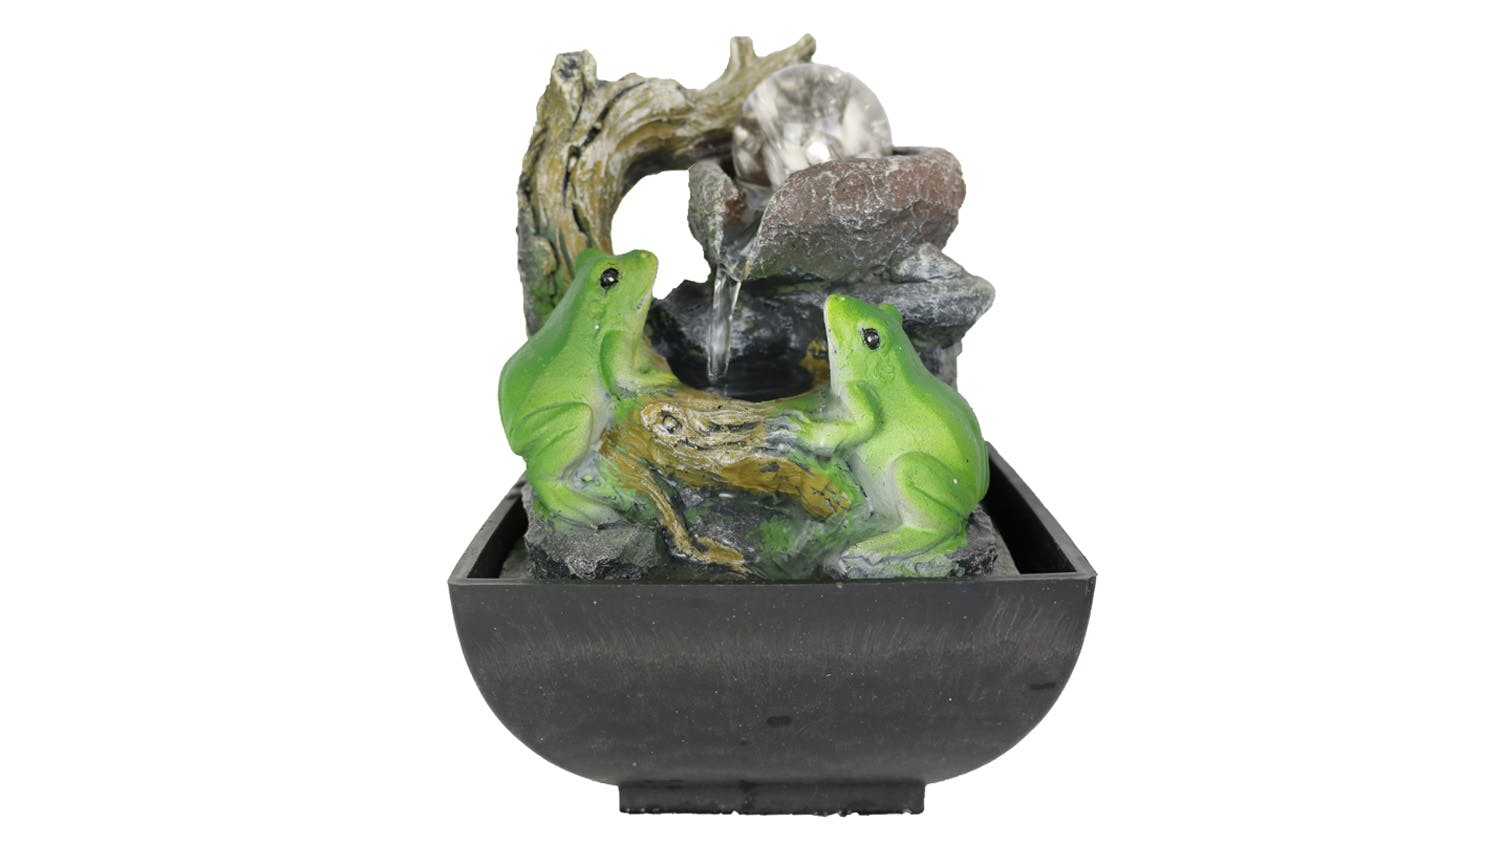 Water Feature Frogs Branch 13 x 13 x 17cm - Black/Green